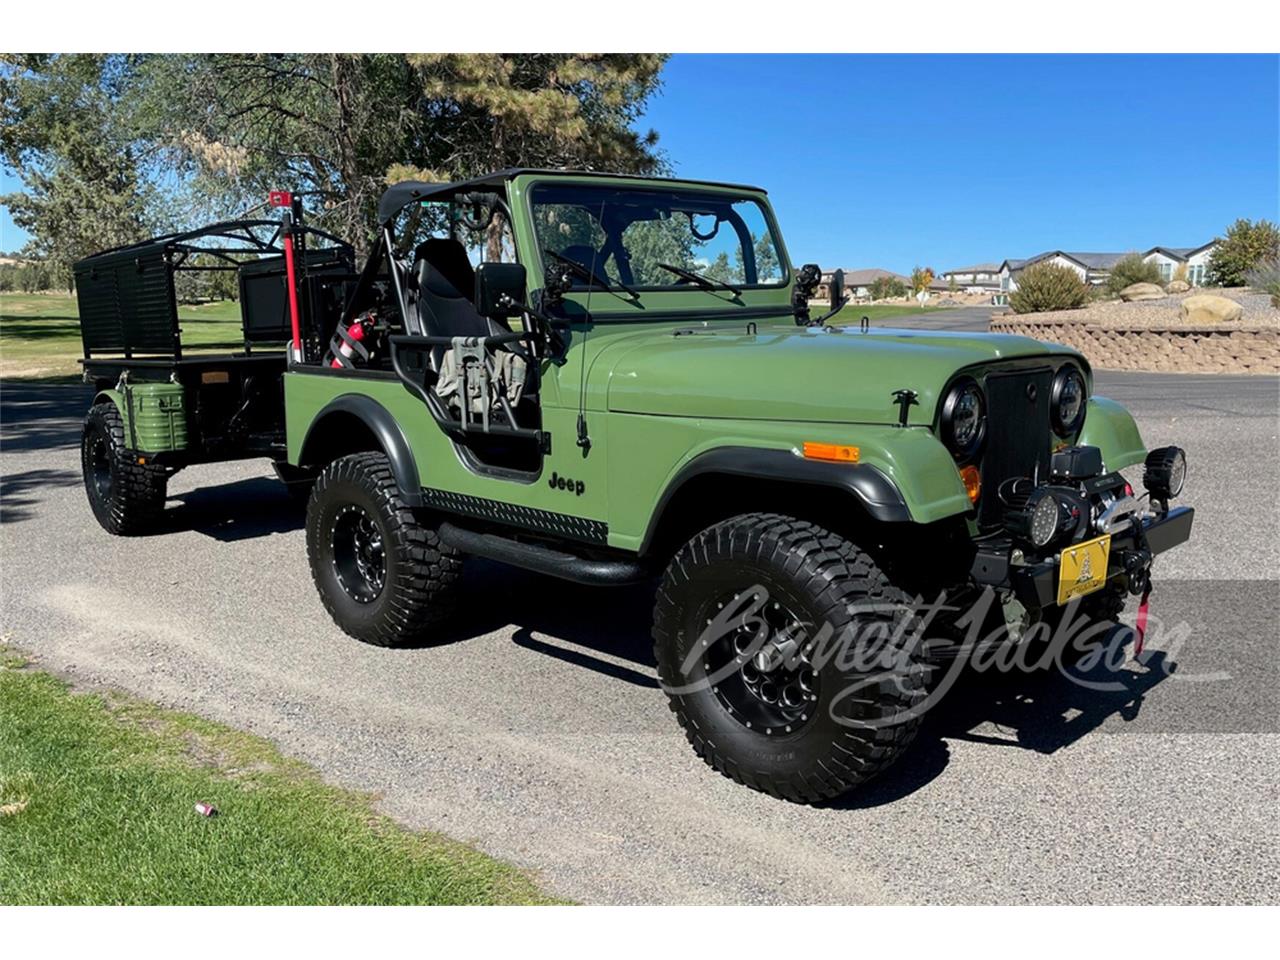 For Sale at Auction: 1981 Jeep CJ5 in Scottsdale, Arizona for sale in Scottsdale, AZ